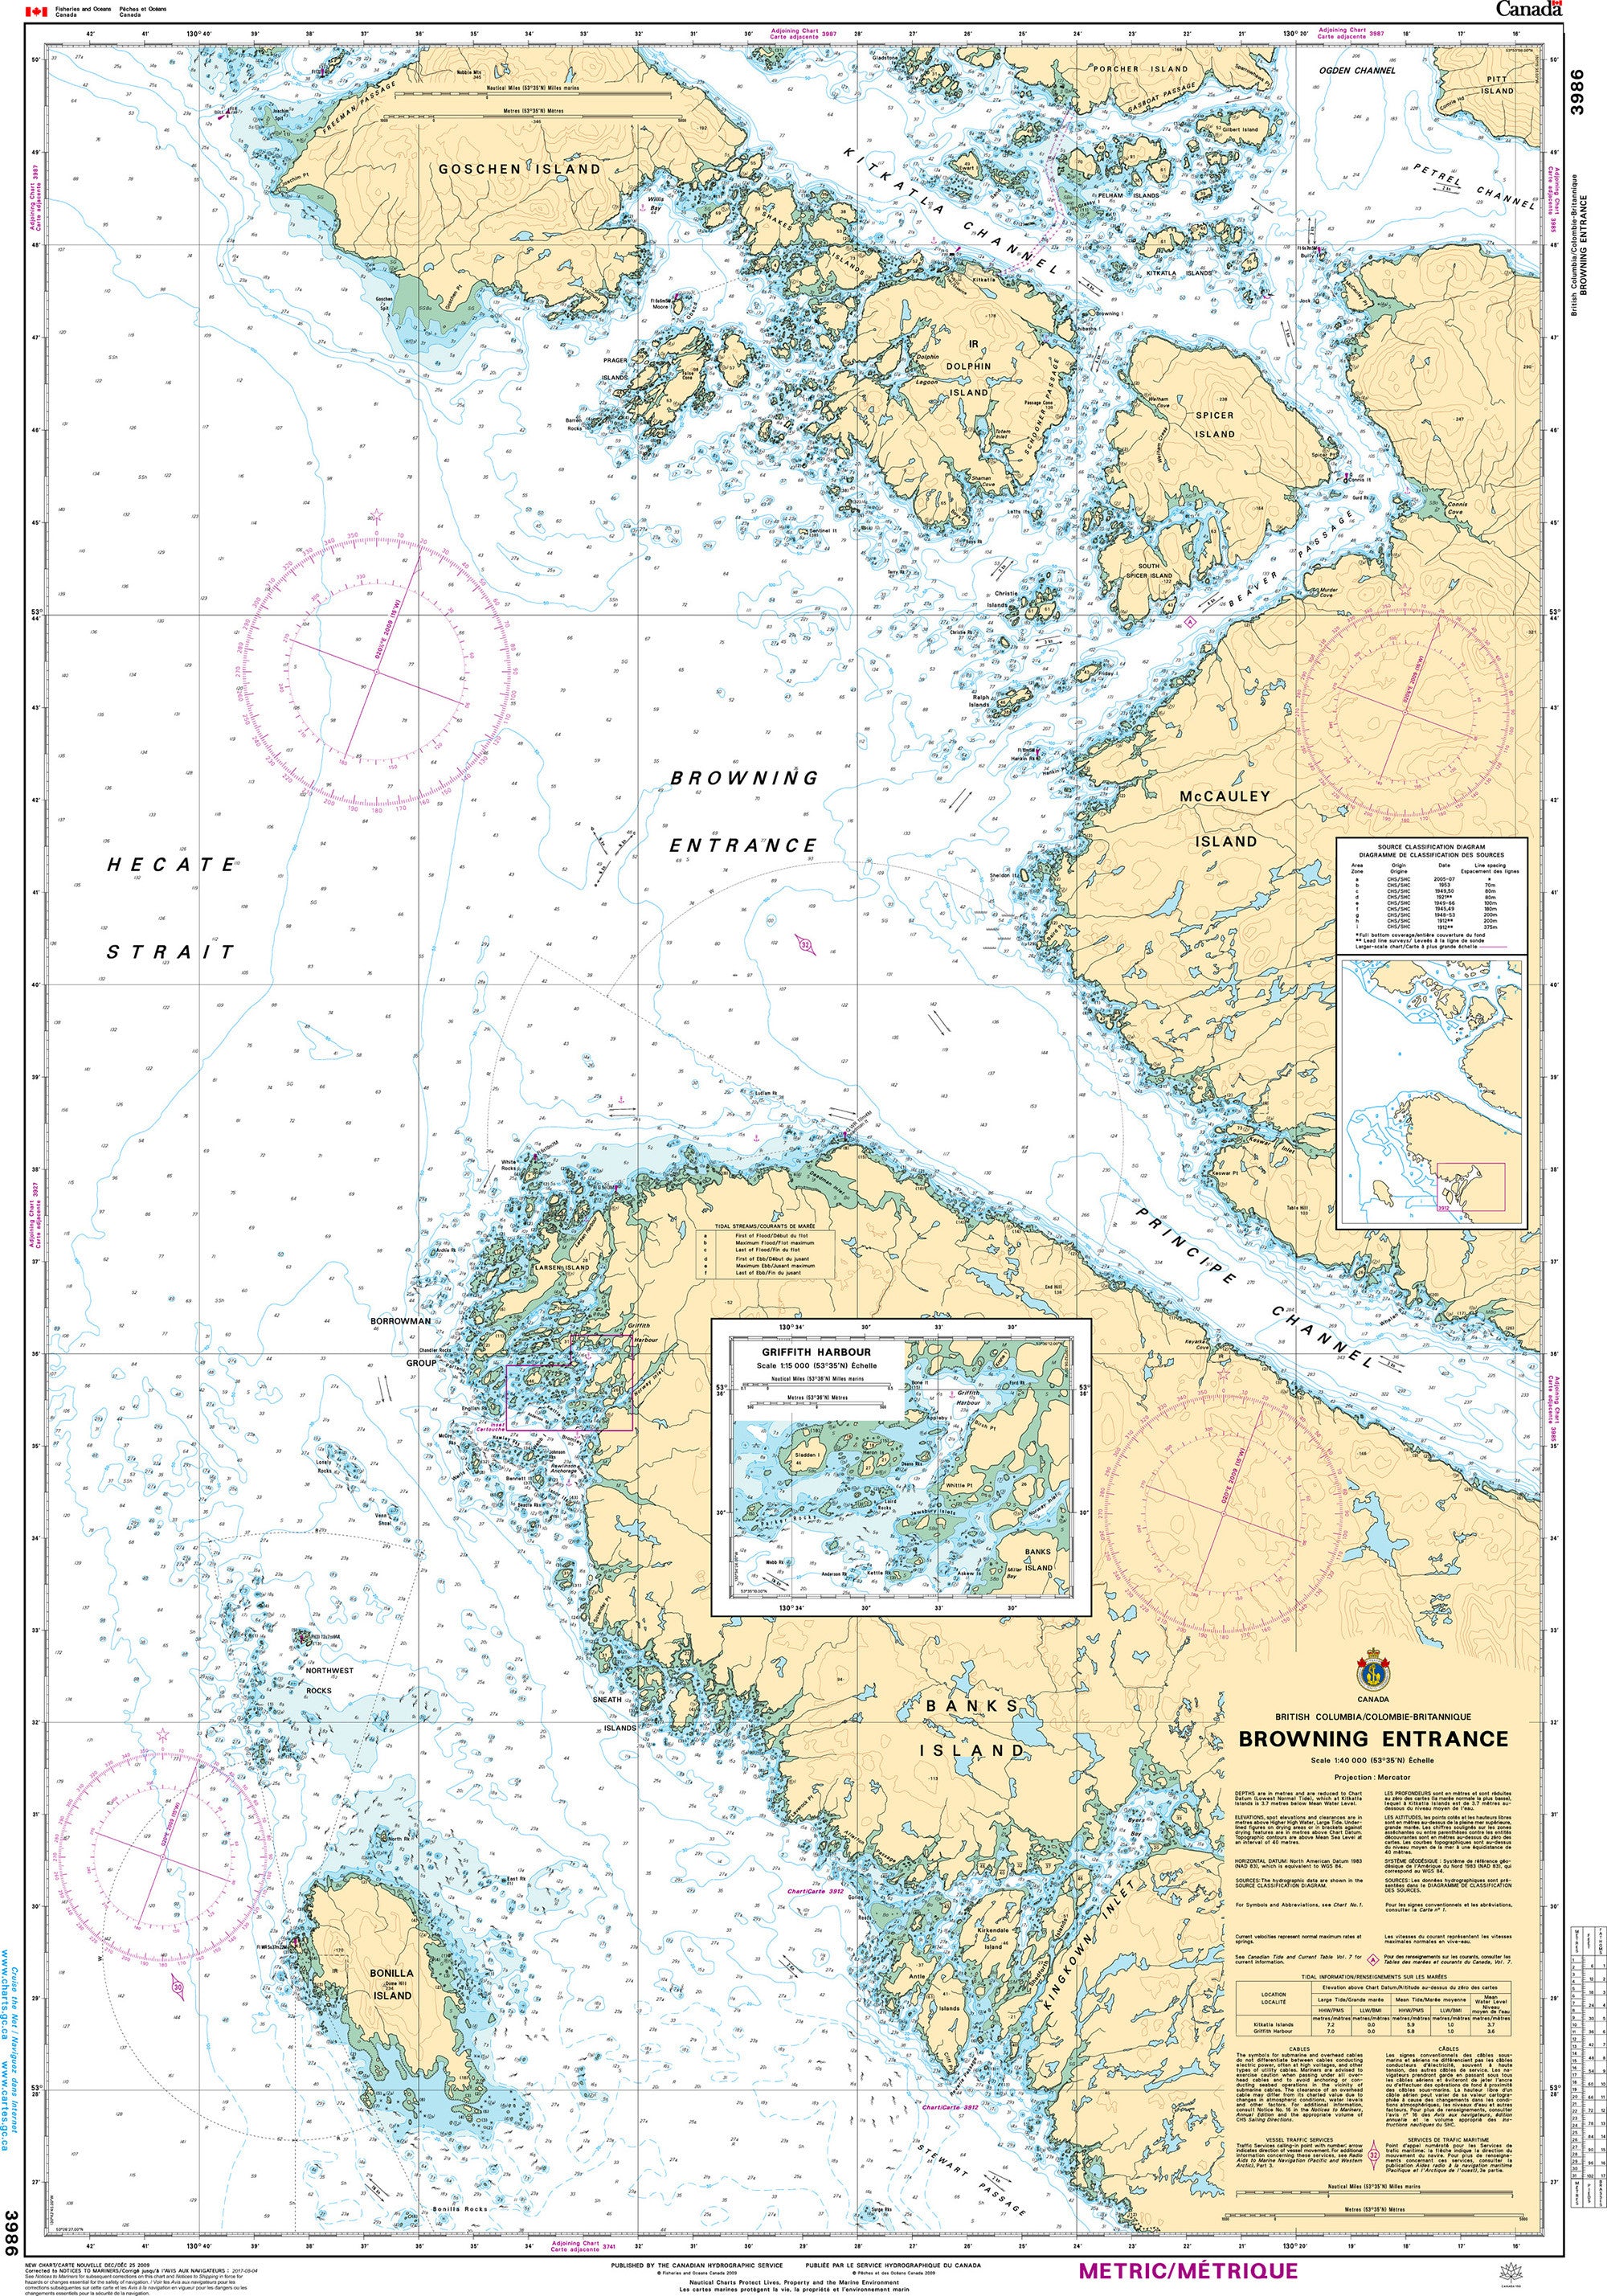 Canadian Hydrographic Service Nautical Chart CHS3986: Browning Entrance